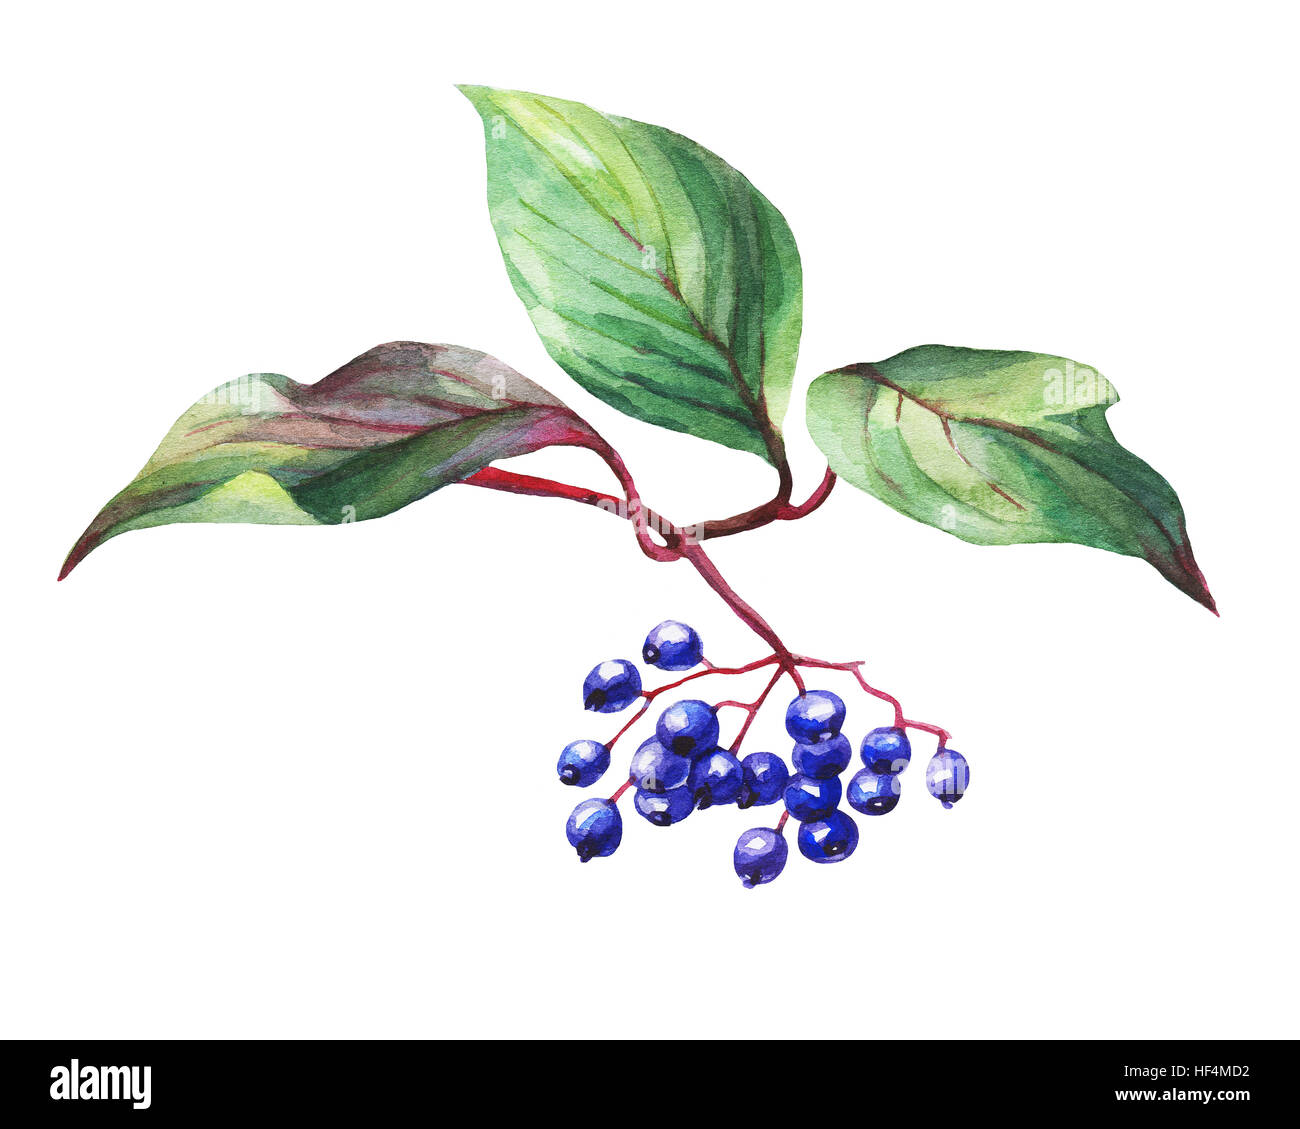 Twig of elderberry (sambucus nigra) plant with autumn leaves and black berries. Watercolor painting, isolated Stock Photo